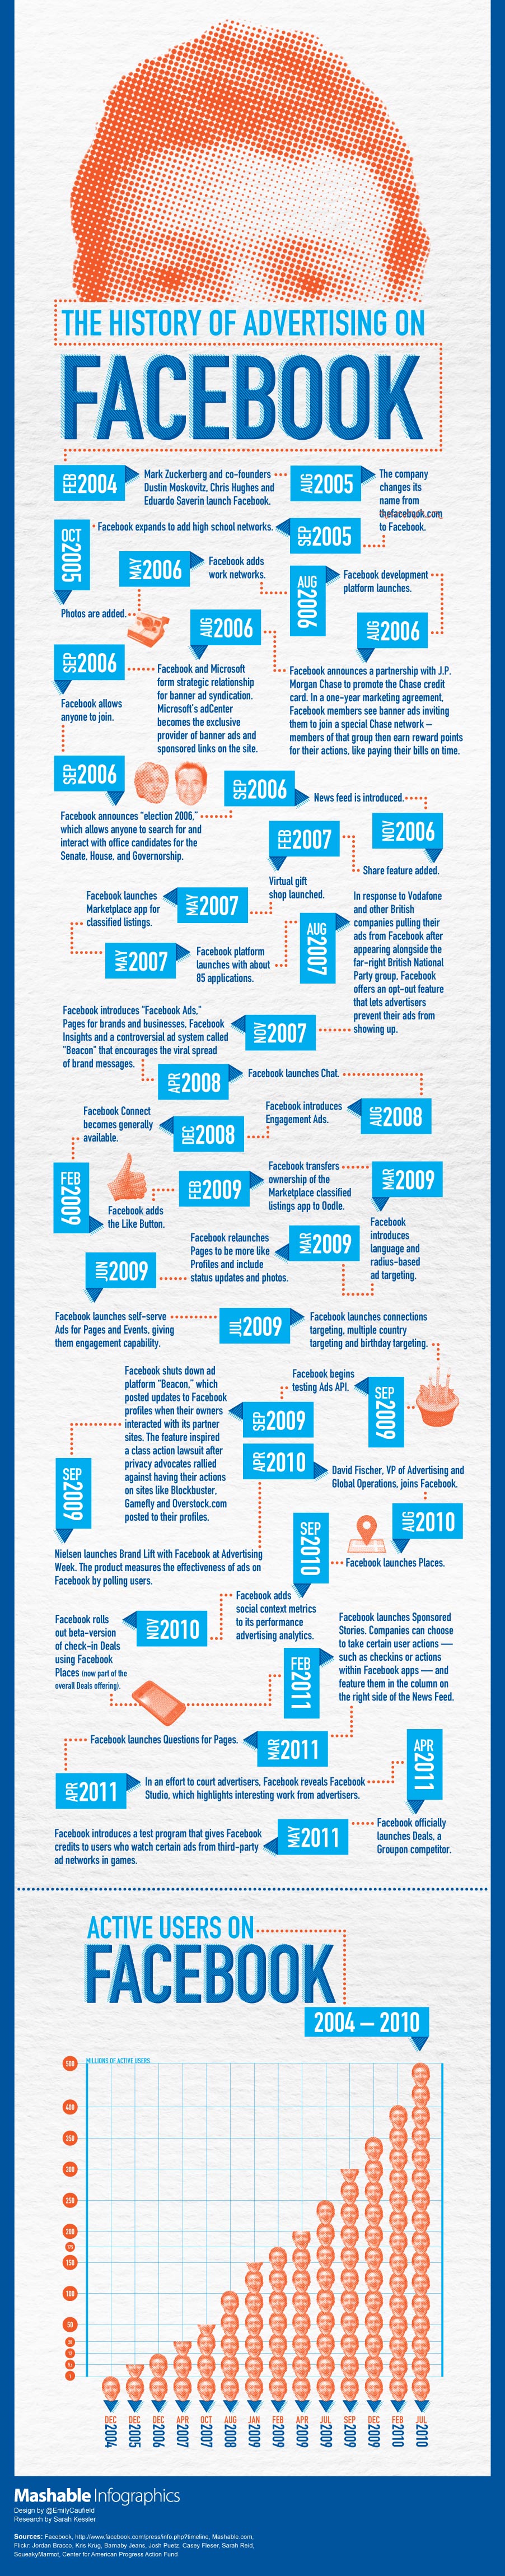 An infographic detailing the history of Facebook advertising month by month, starting with Feb 2004 and ending with May 2011 